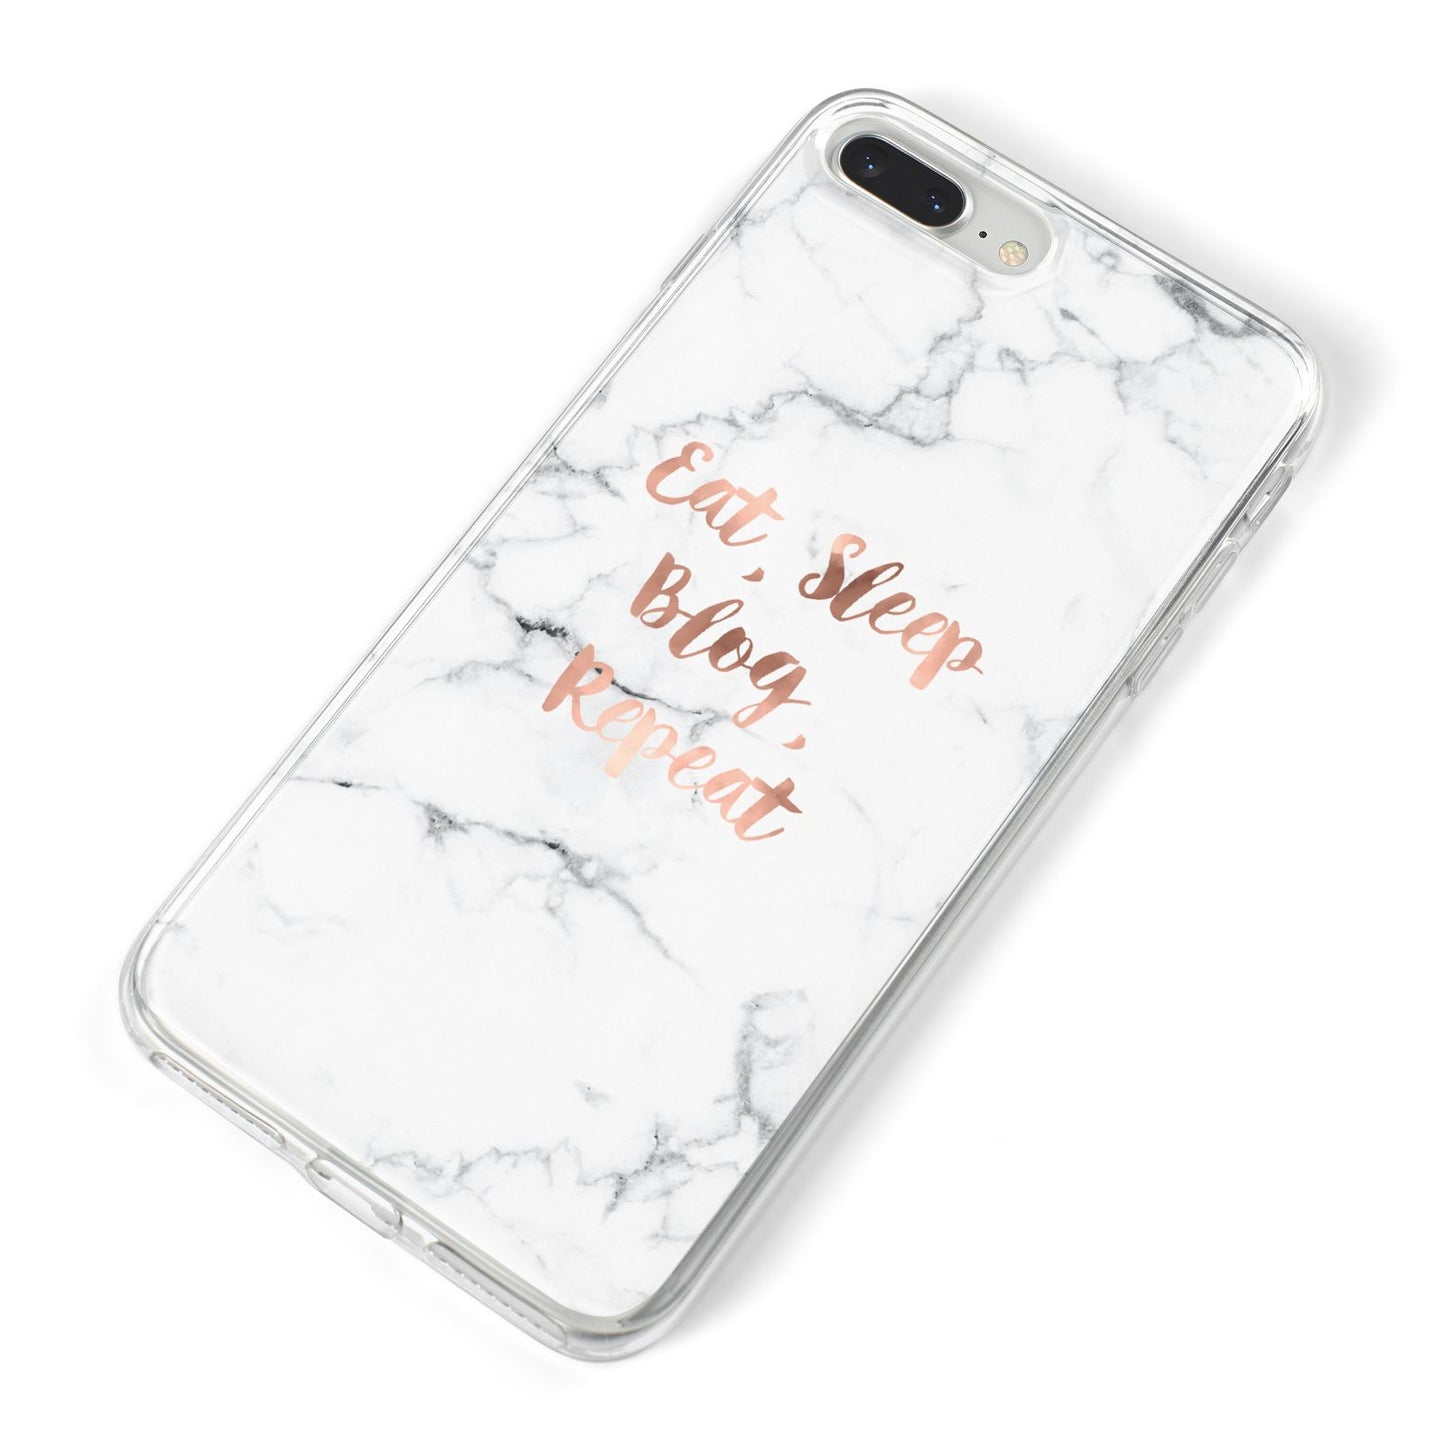 Eat Sleep Blog Repeat Marble Effect iPhone 8 Plus Bumper Case on Silver iPhone Alternative Image